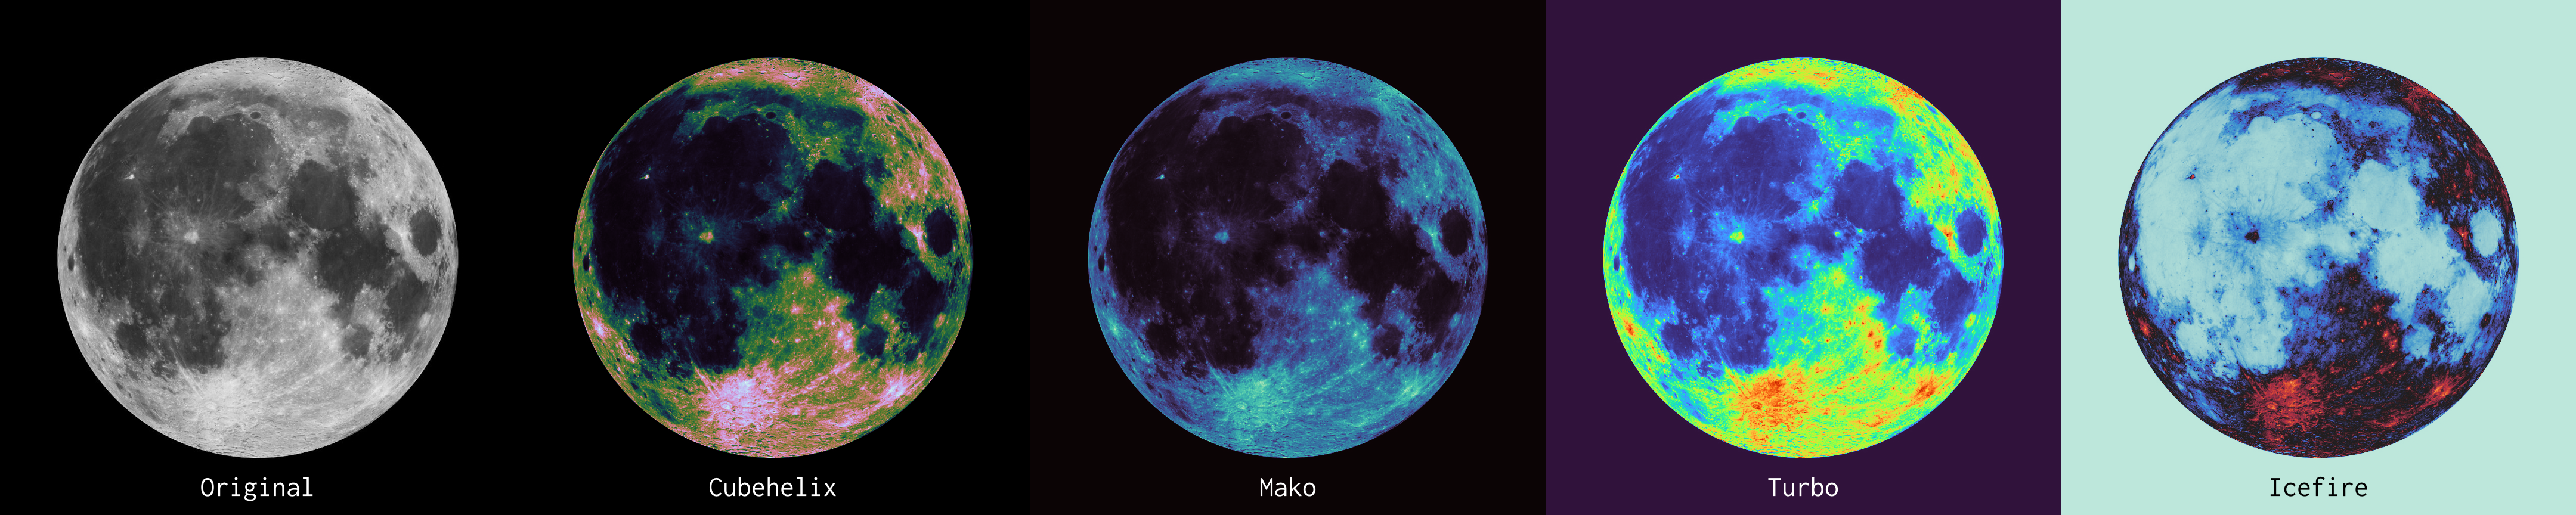 Heatmap of the moon using perceptually uniform colormaps from Unicolour.Datasets, created with Unicolour